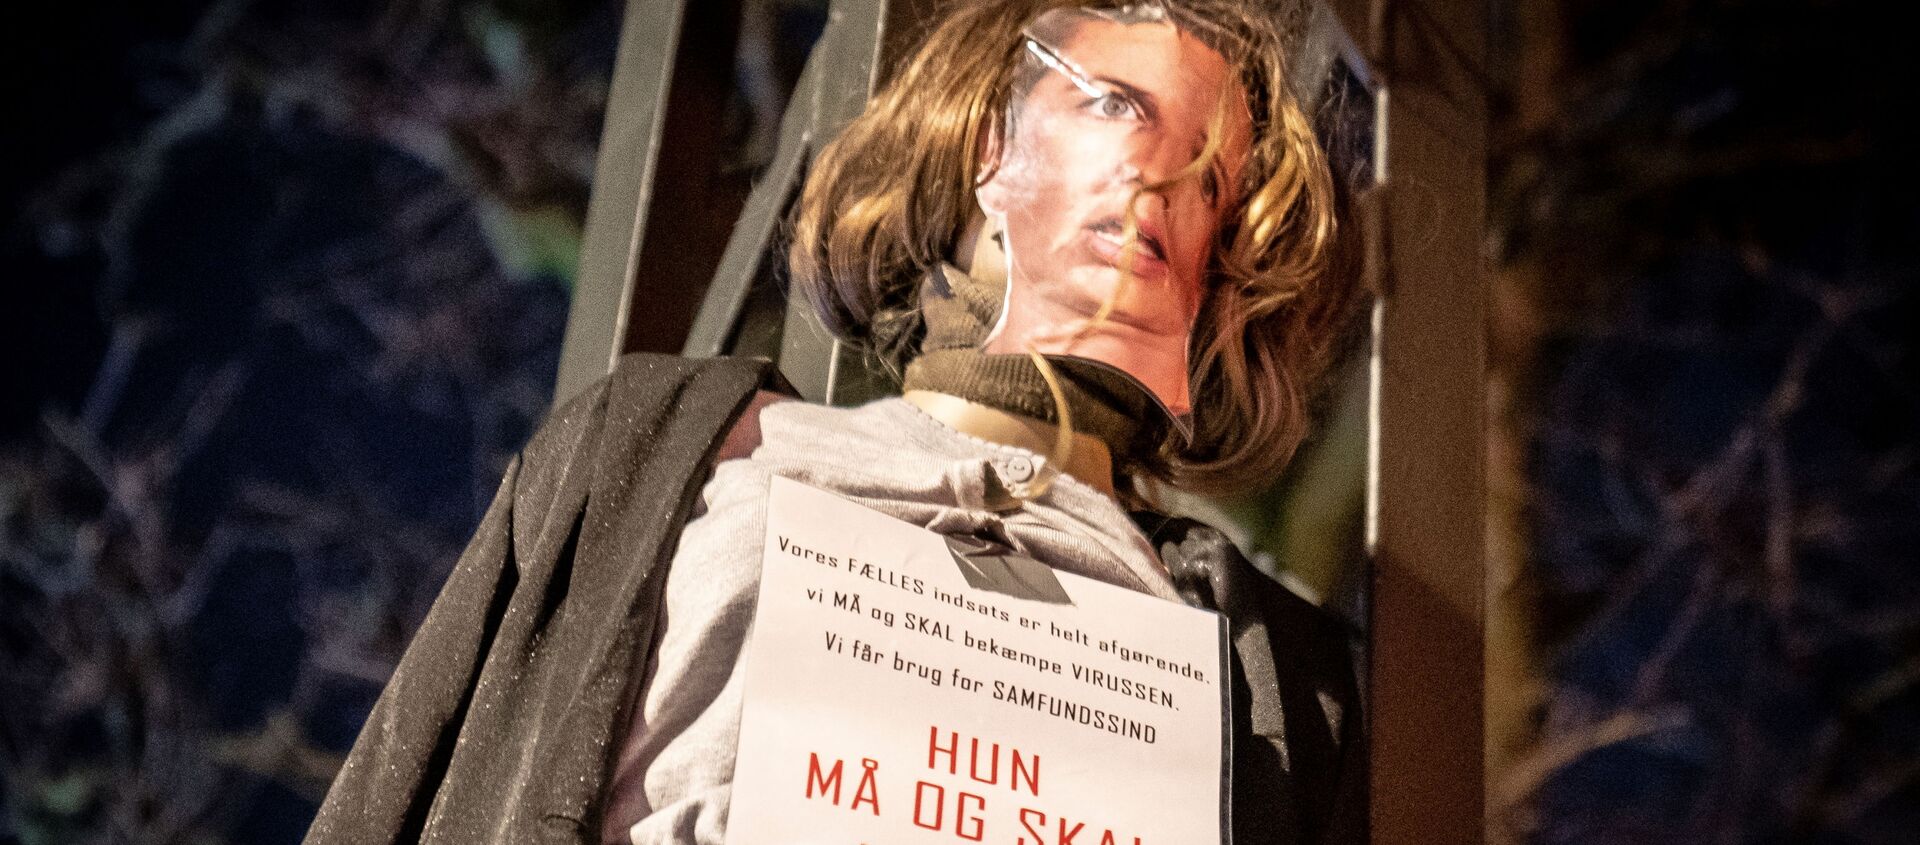 An effigy representing Danish Prime Minister Mette Frederiksen with a sign reading She must be put down hangs on a street during a protest by a group called Men in Black against COVID-19 restrictions in Copenhagen, Denmark  - Sputnik International, 1920, 25.01.2021